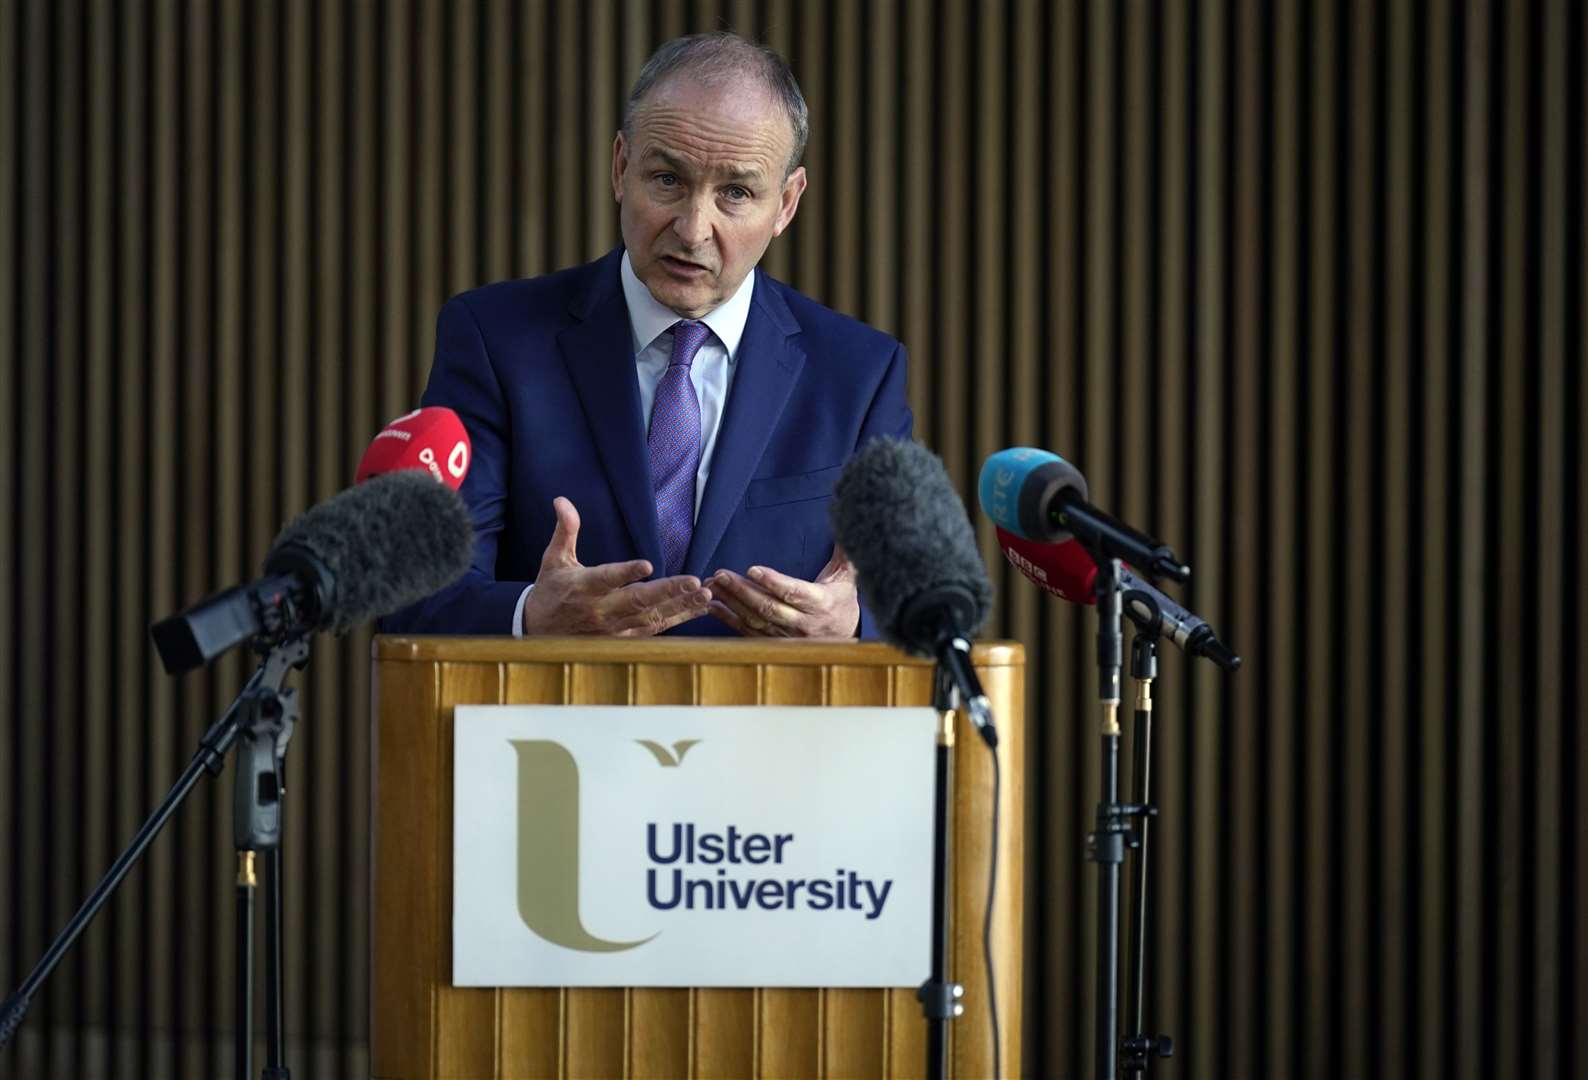 Tanaiste Micheal Martin during a visit to Ulster University in Belfast (Niall Carson/PA)